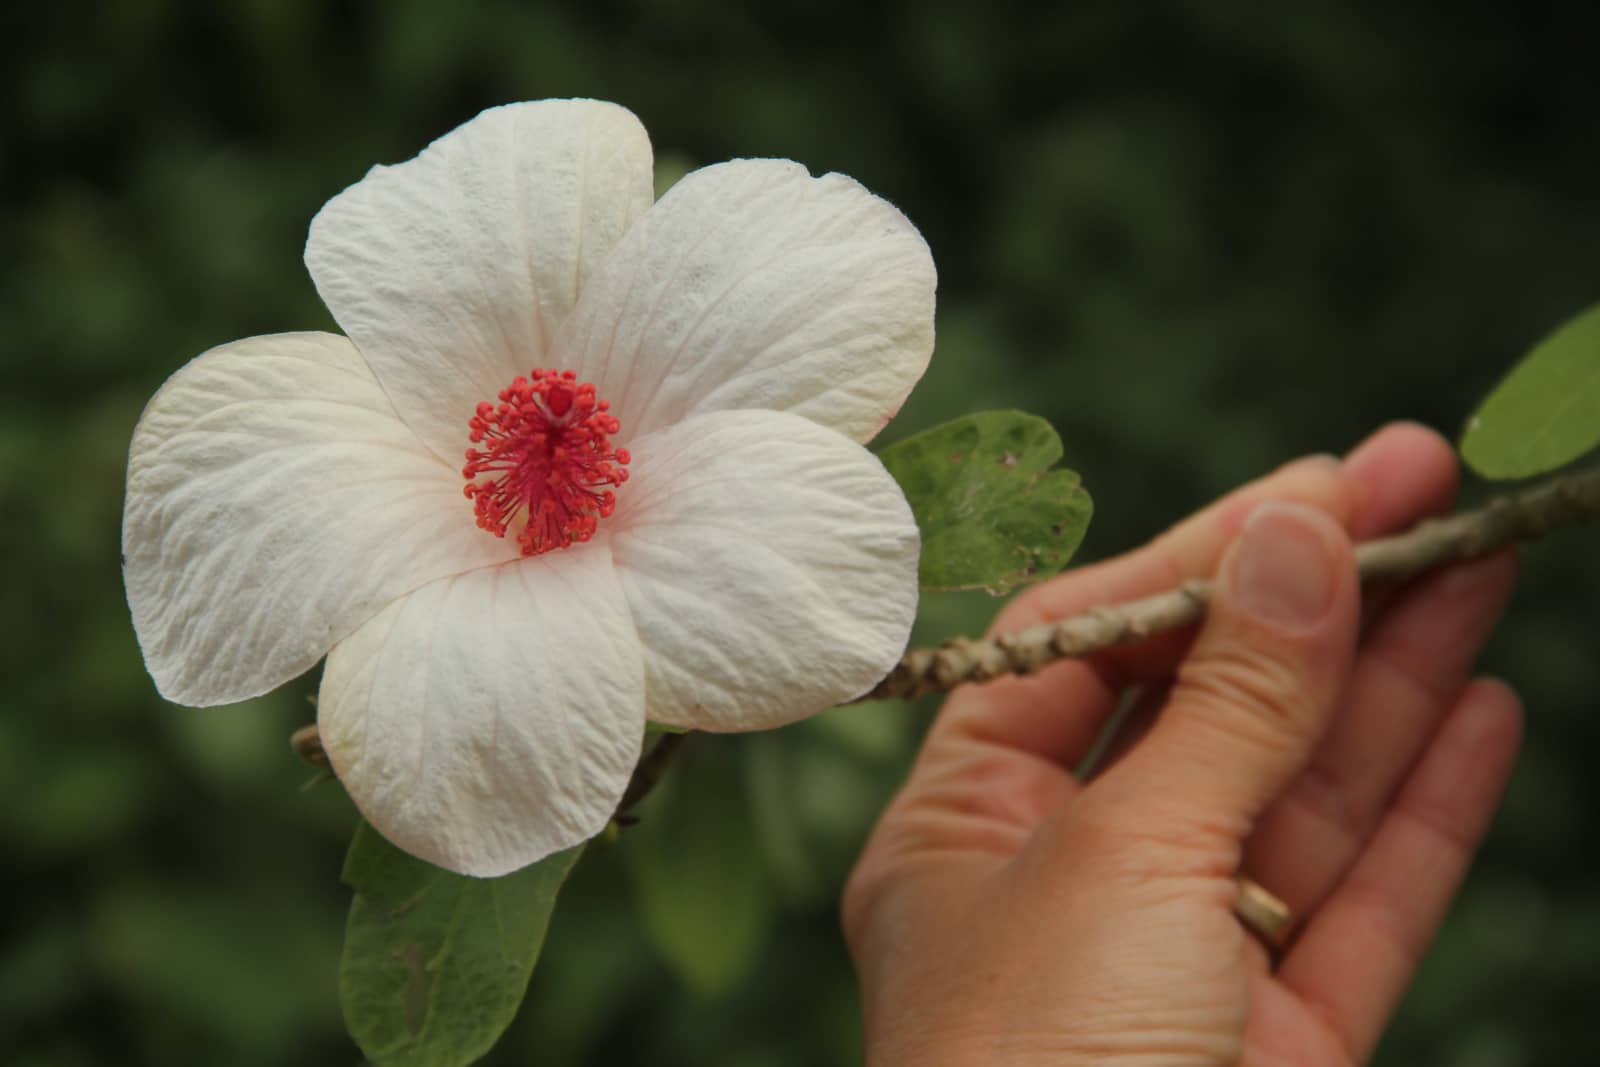 Hand holding white pedalled flower with red stamen